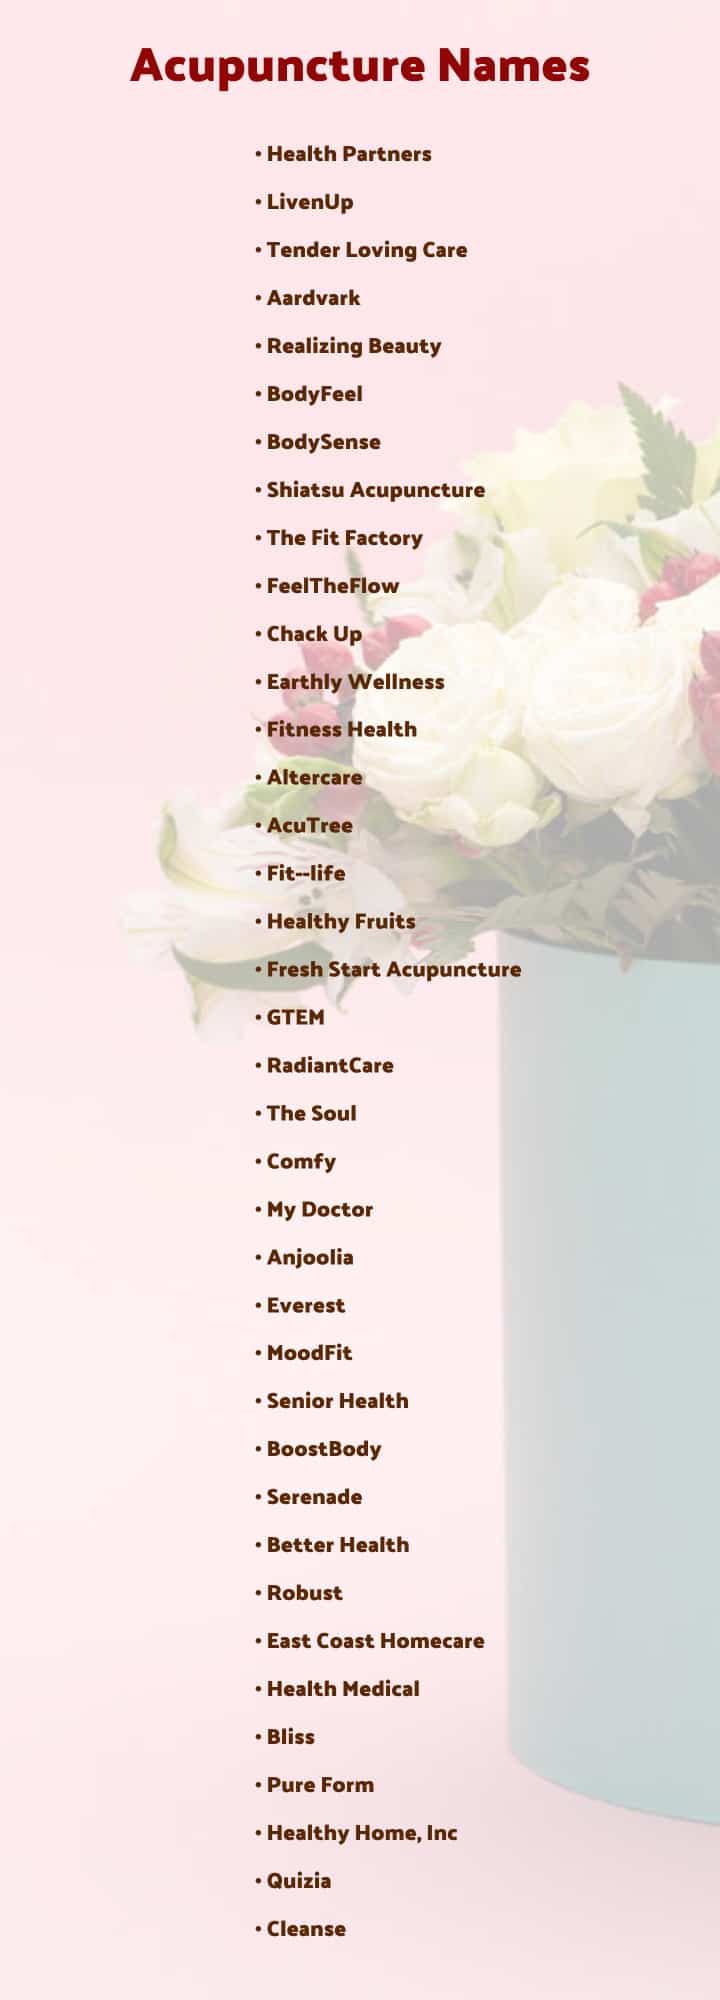 acupuncture clinic names list